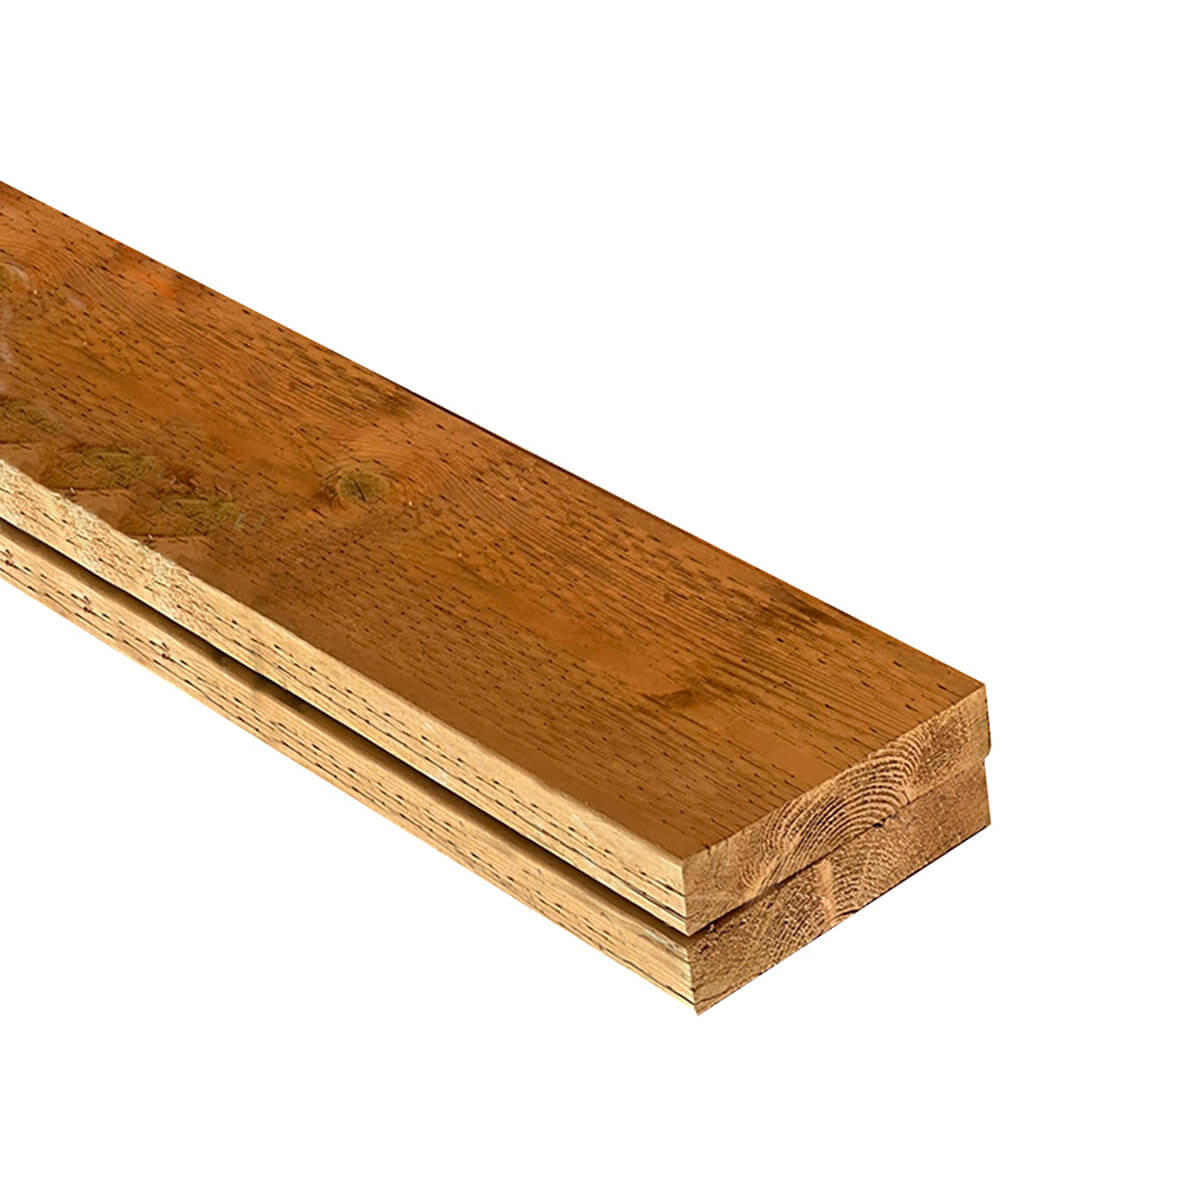 2X8X12-ft - .40 - Pressure Treated Lumber - Ground Contact